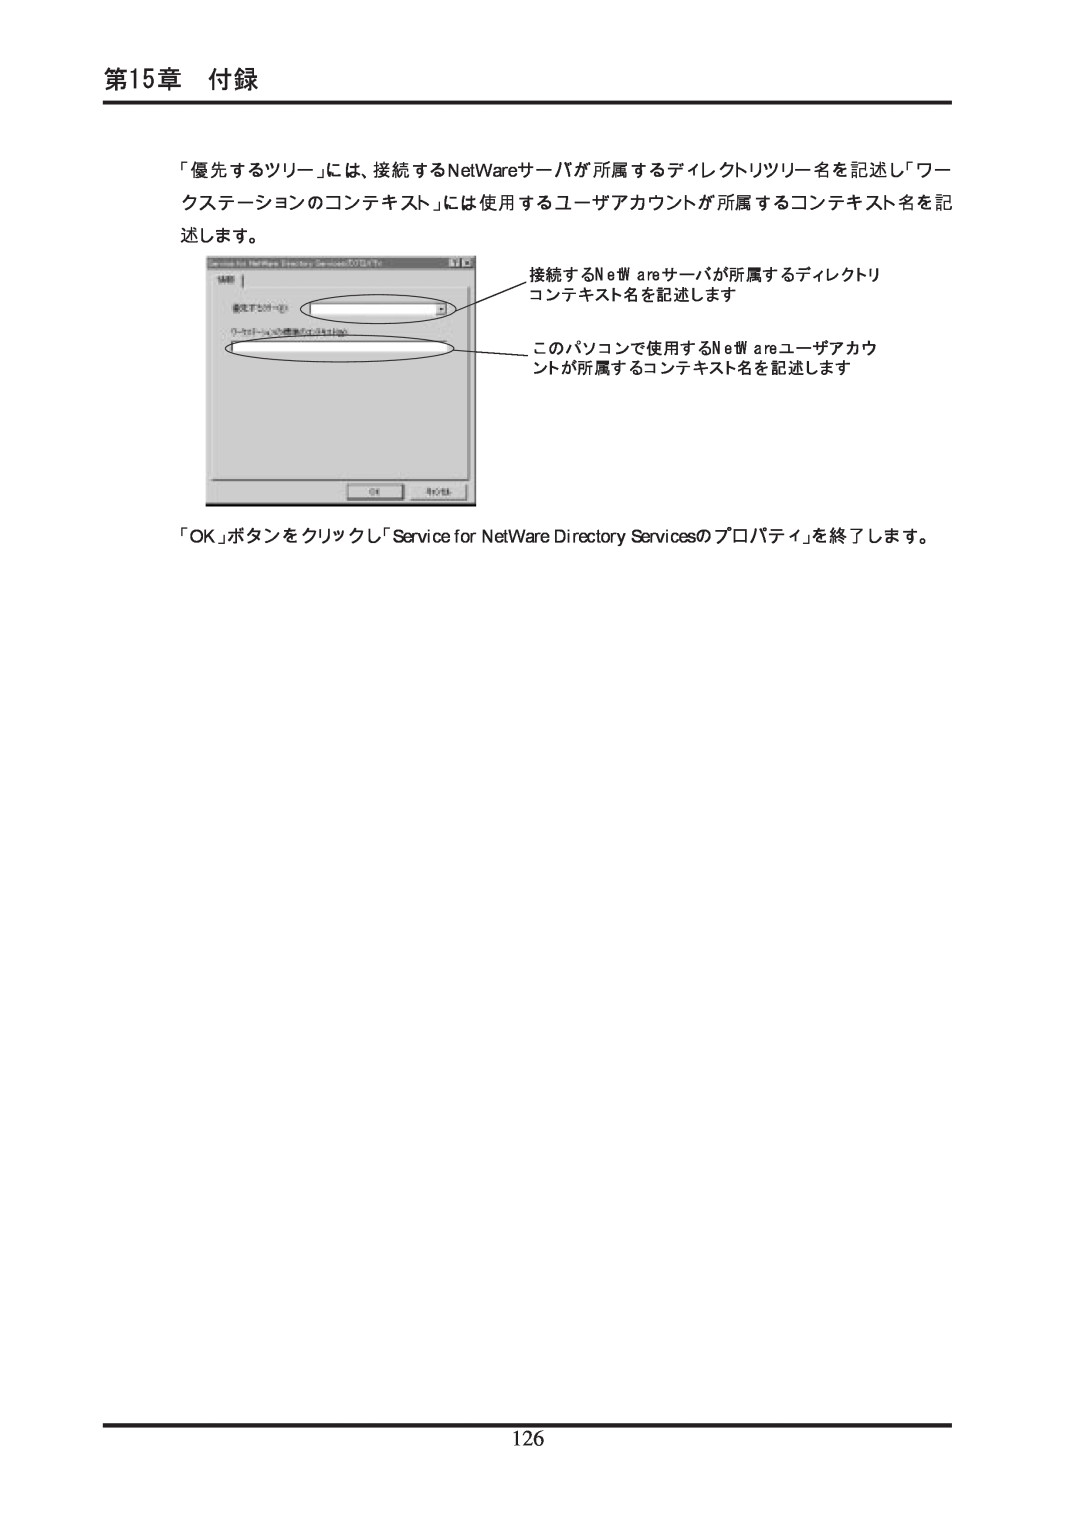 Ratoc Systems REX-R280 manual 第15章 付録, 「OK」ボタンをクリックし「Service for NetWare Directory Servicesのプロパティ」を終了します。 